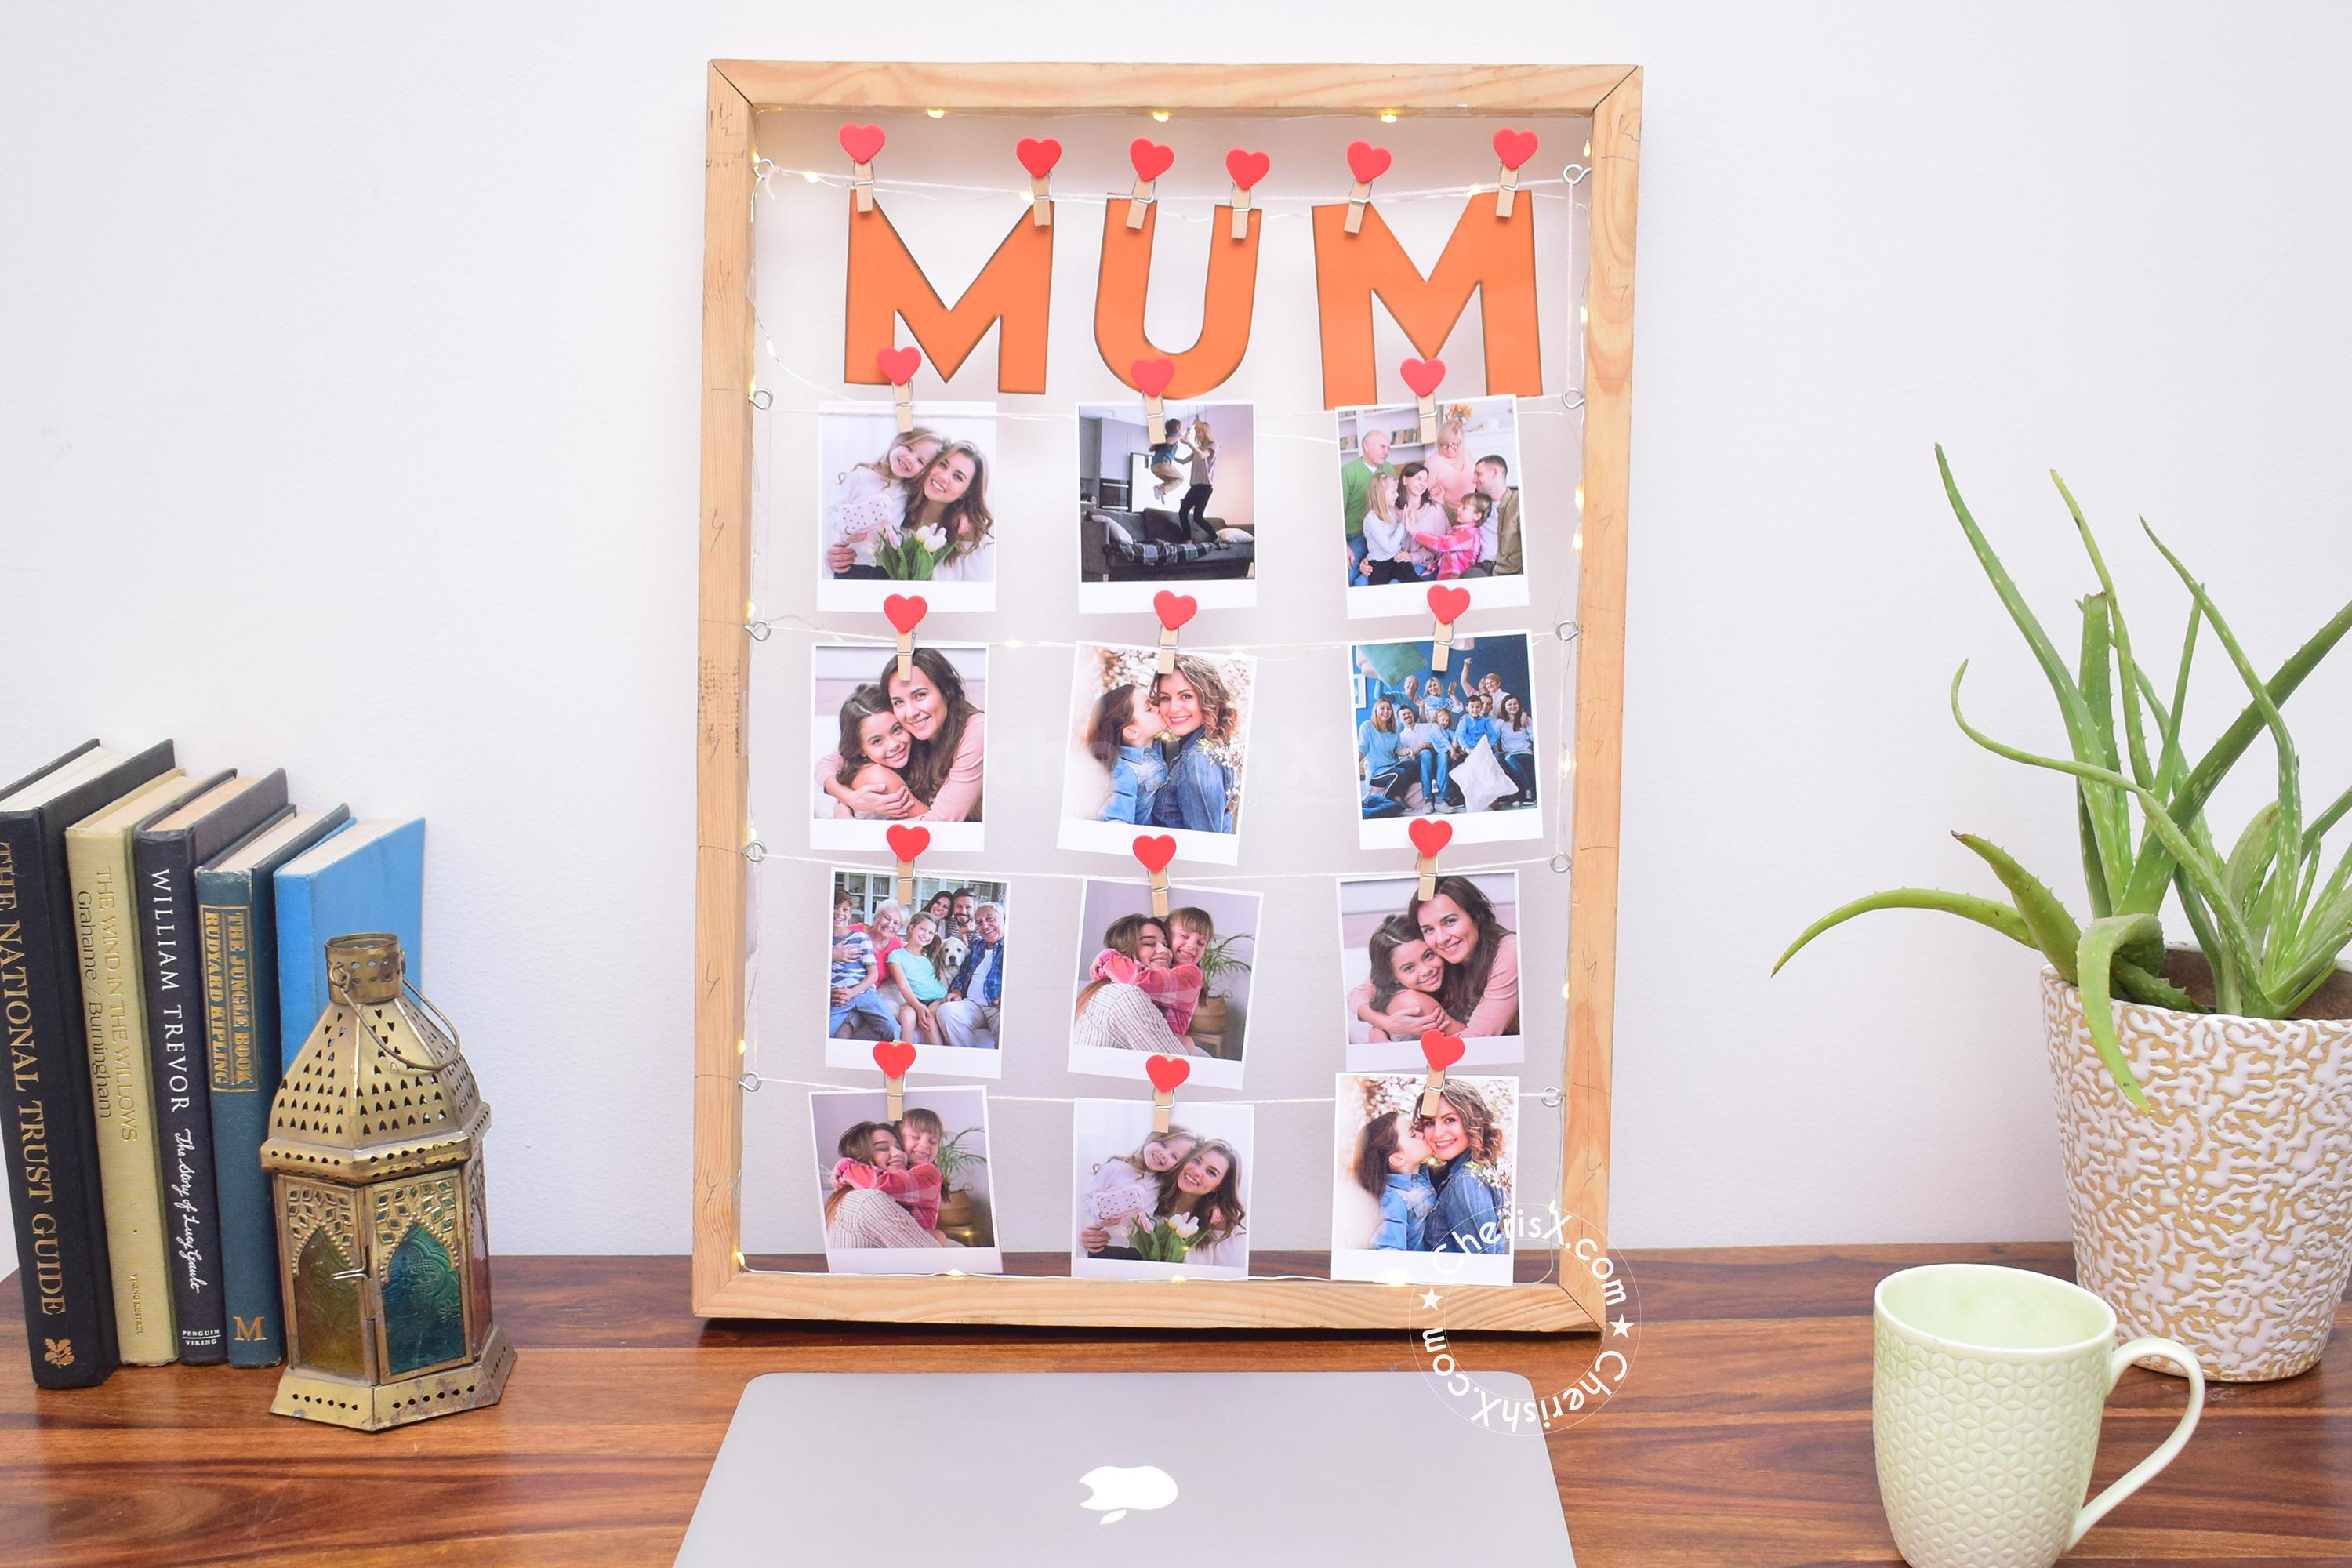 Gift your mother a loving Mum Memory String Gift Idea!